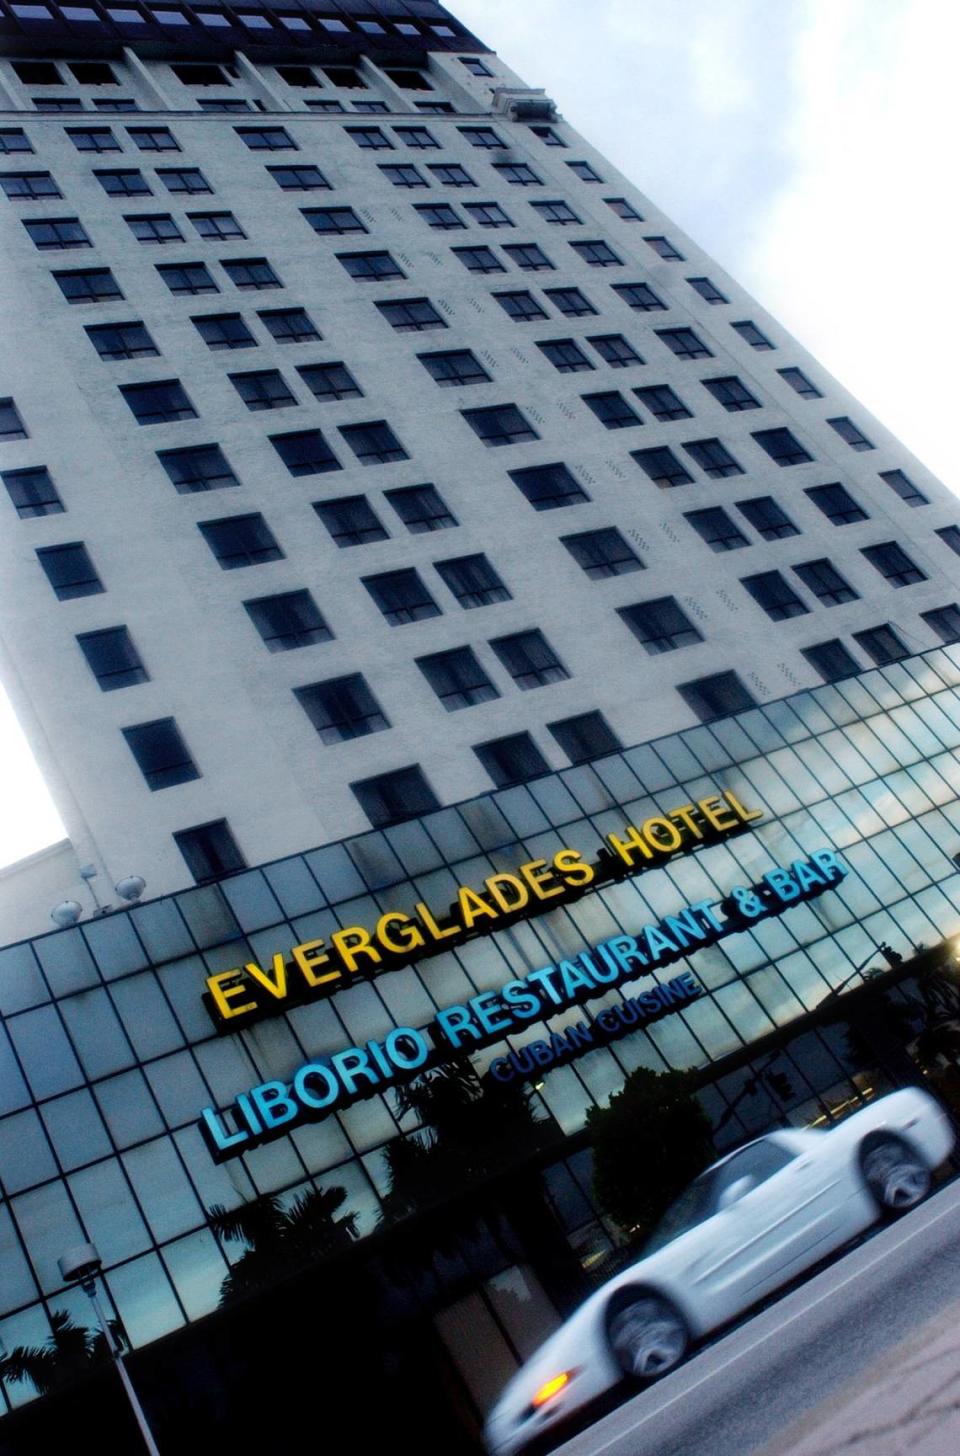 In 2002, the modern glass facade of the Everglades. Miami Herald File